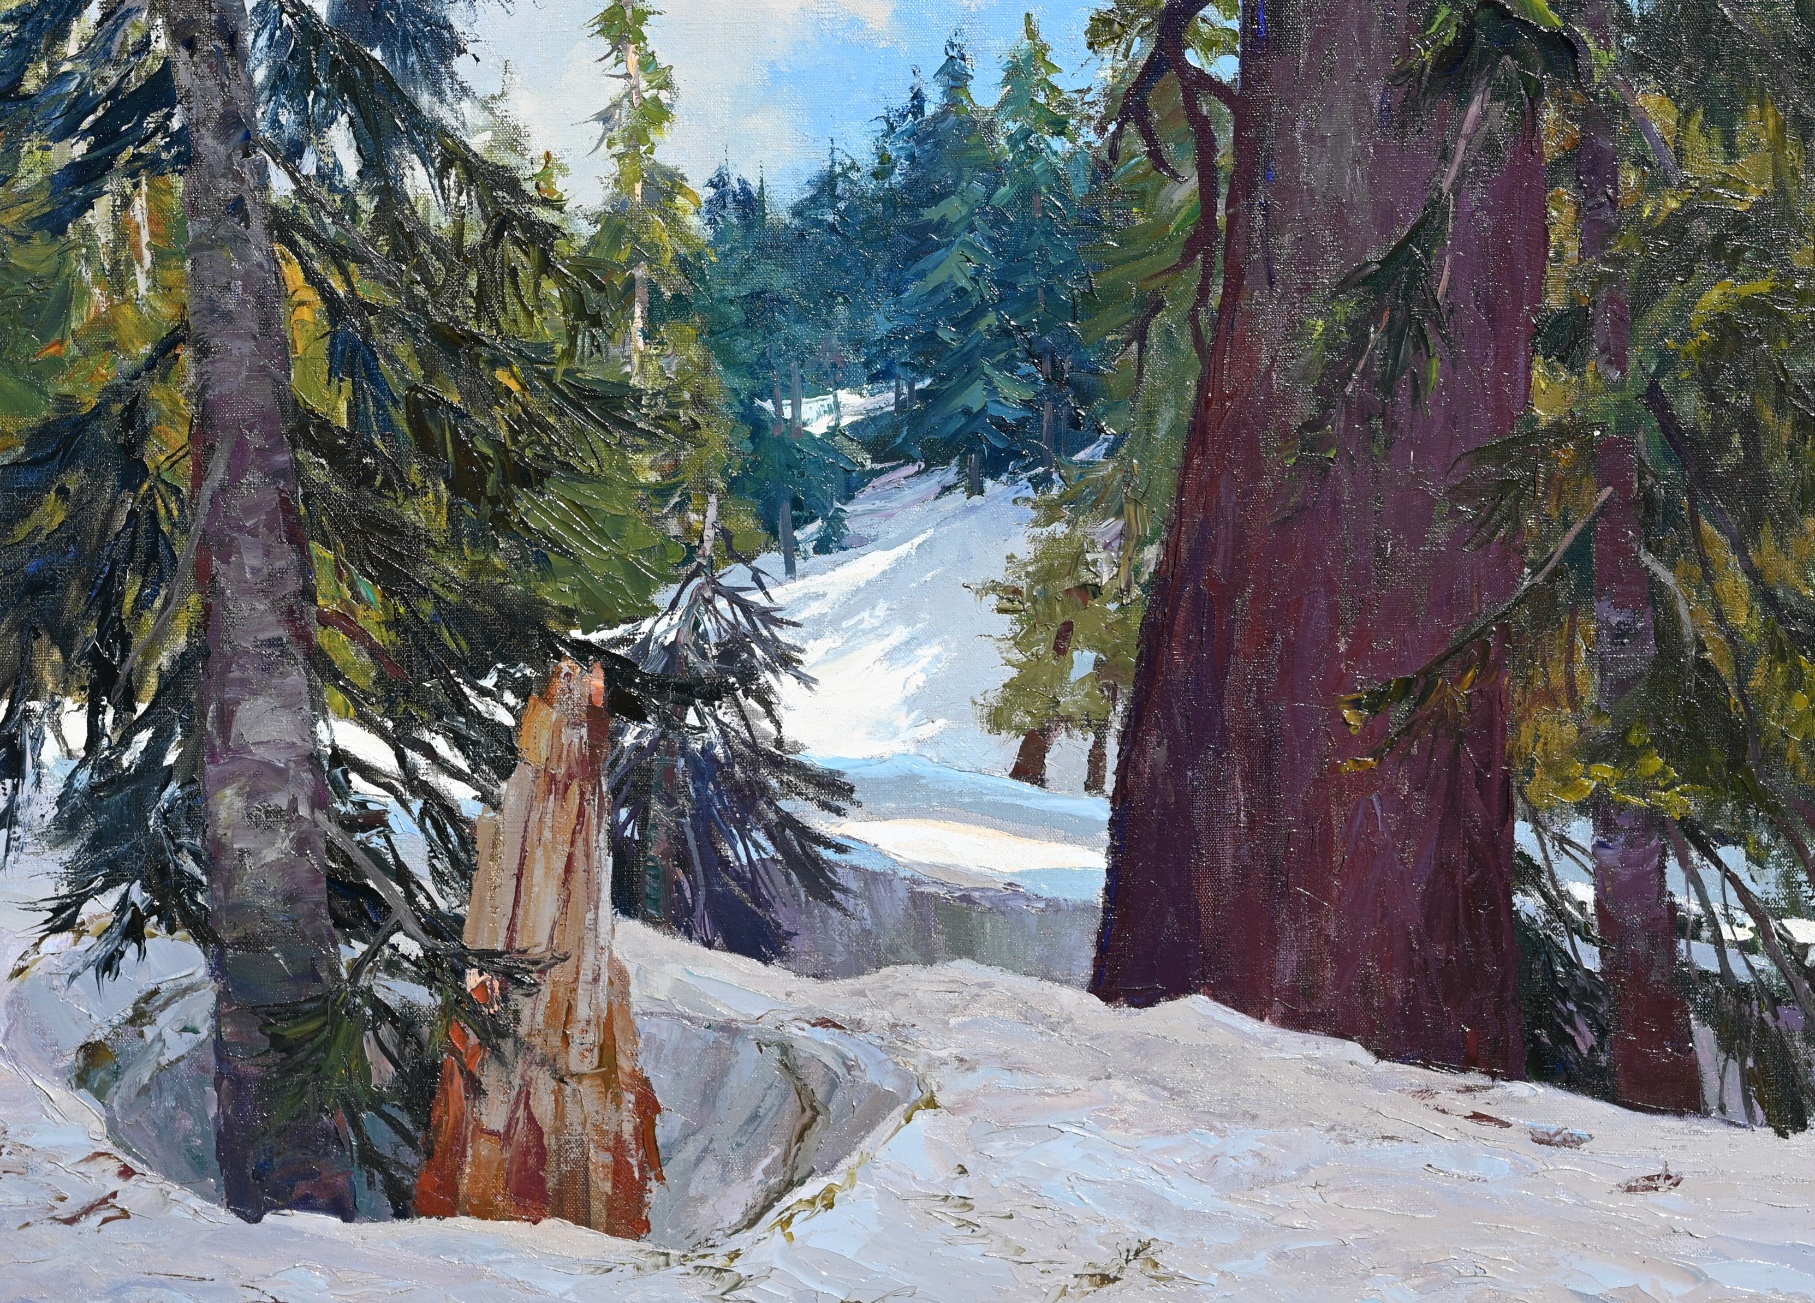 Ken Gore (1911 - 1990) "Snow at Cayuse Pass" - Image 3 of 8